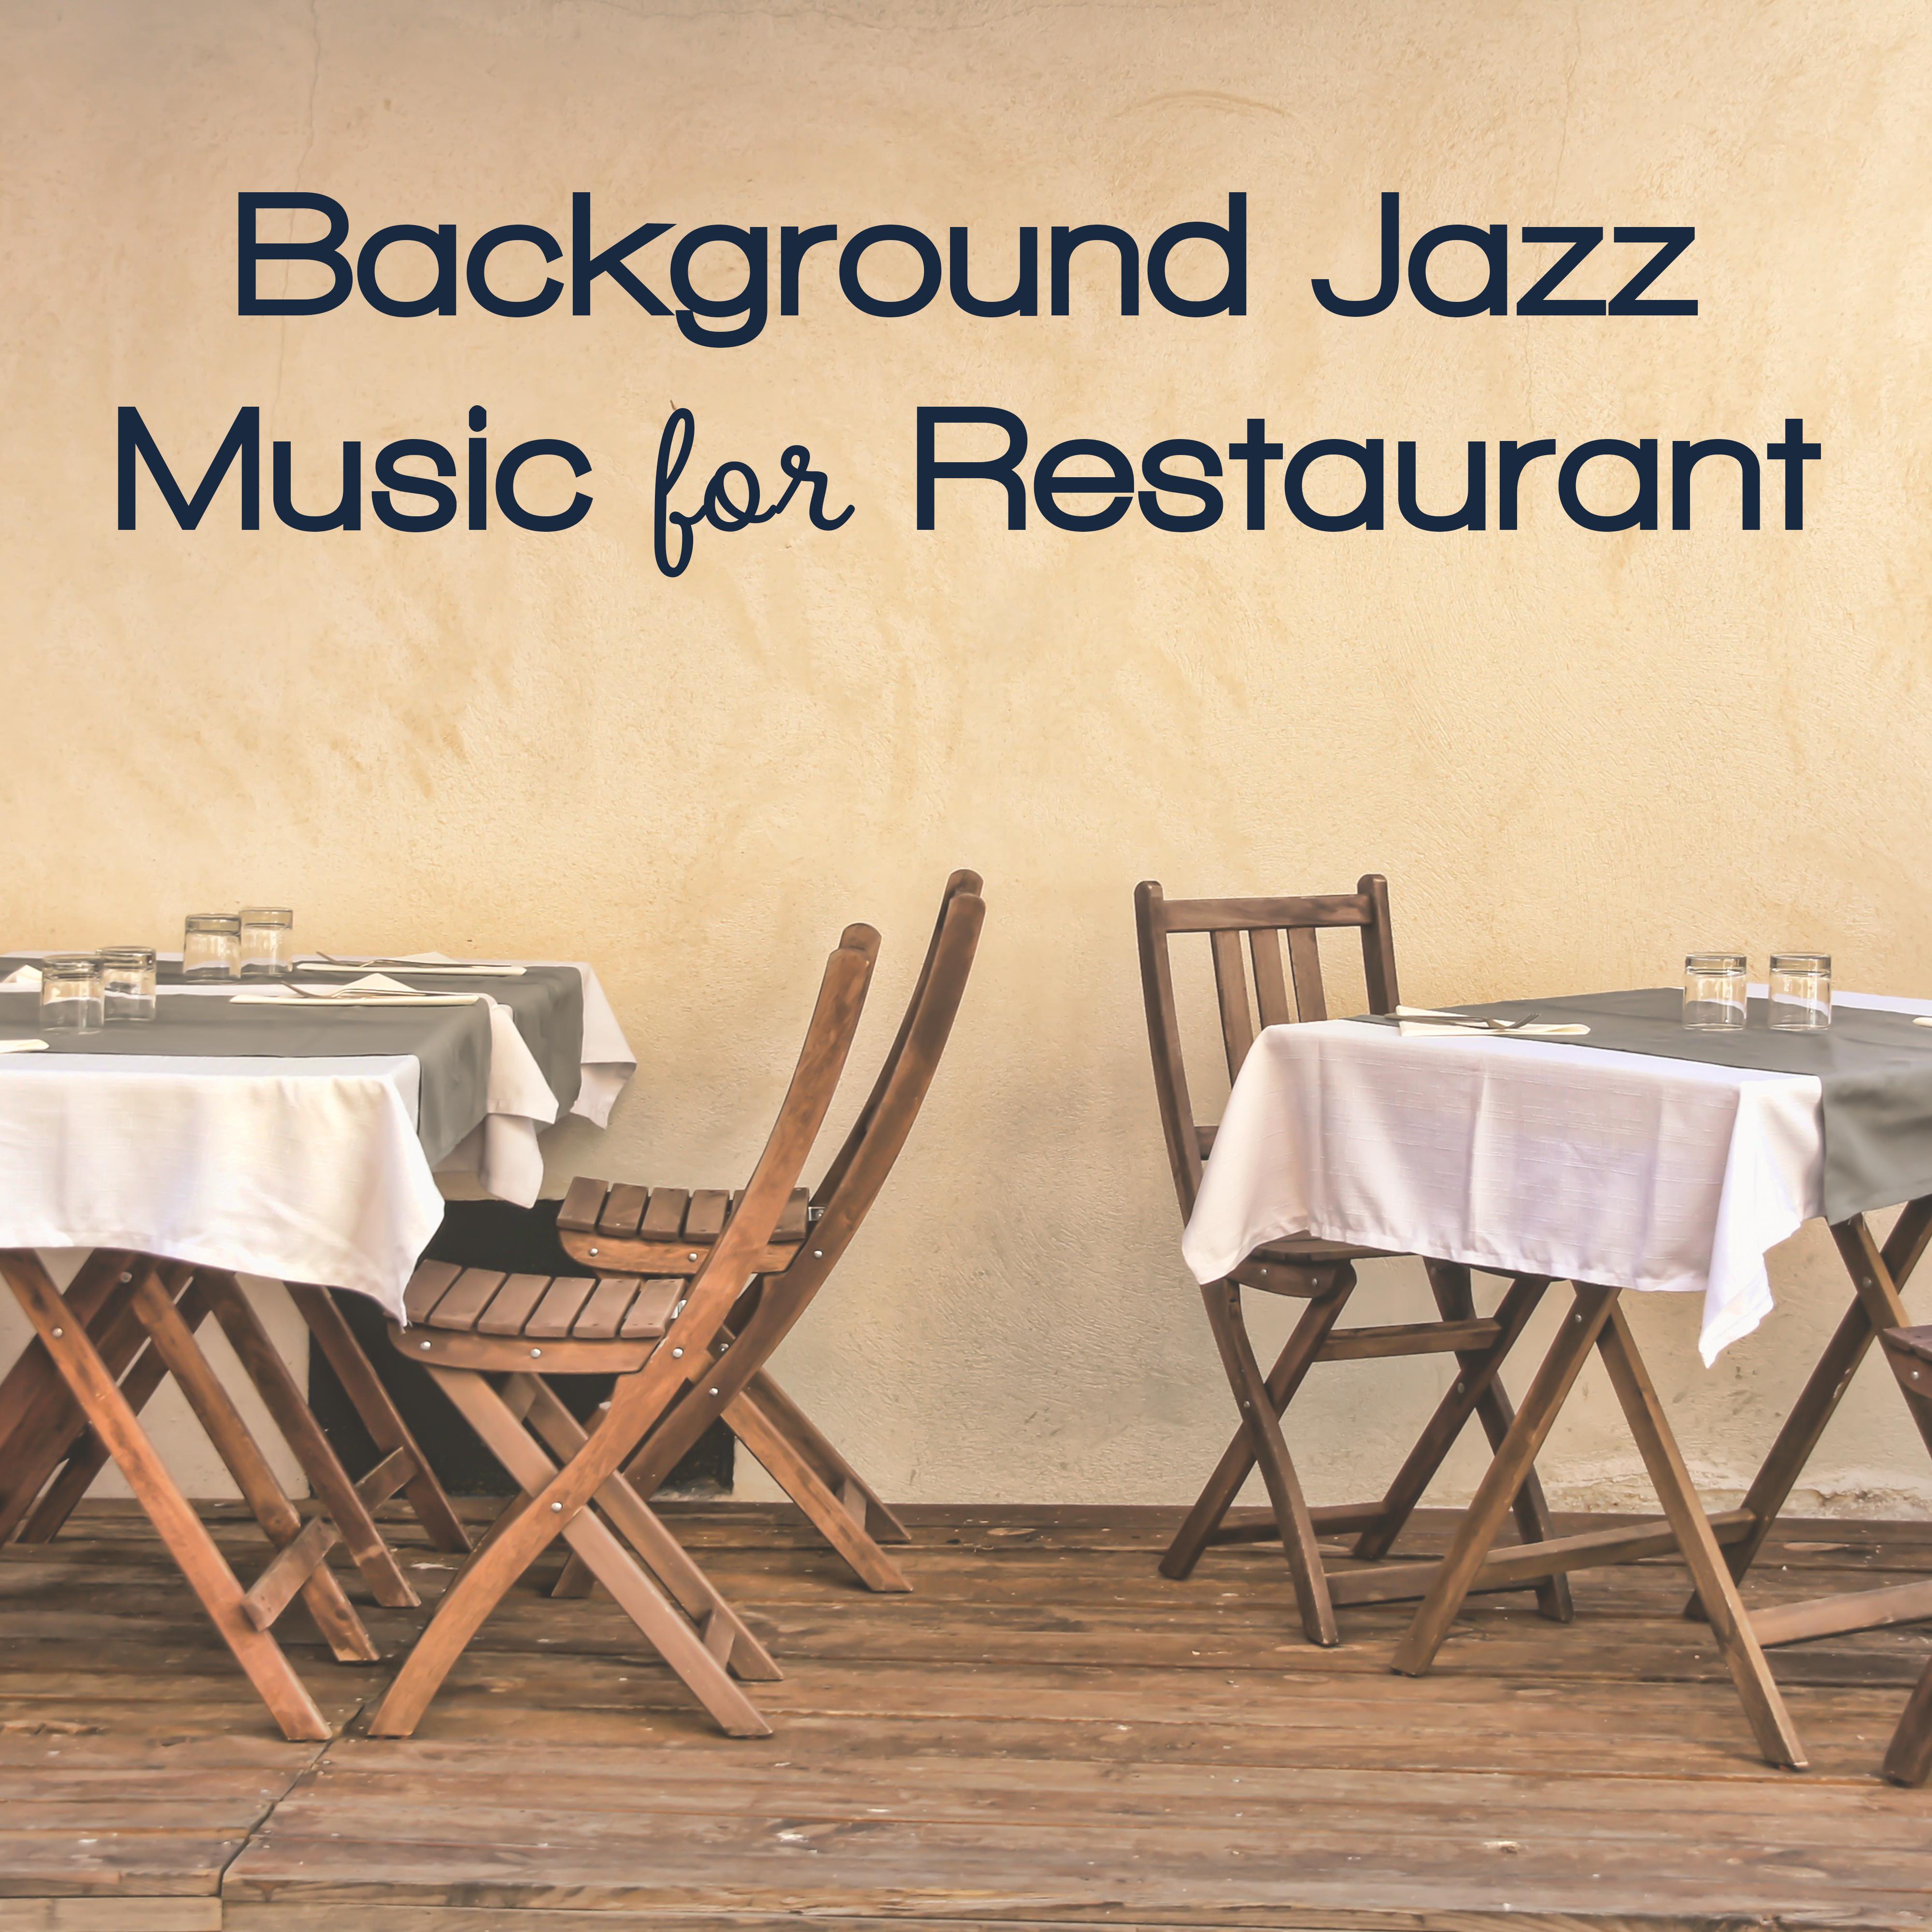 Background Jazz Music for Restaurant  Smooth Jazz to Relax, Dinner Time, Coffee Drinking